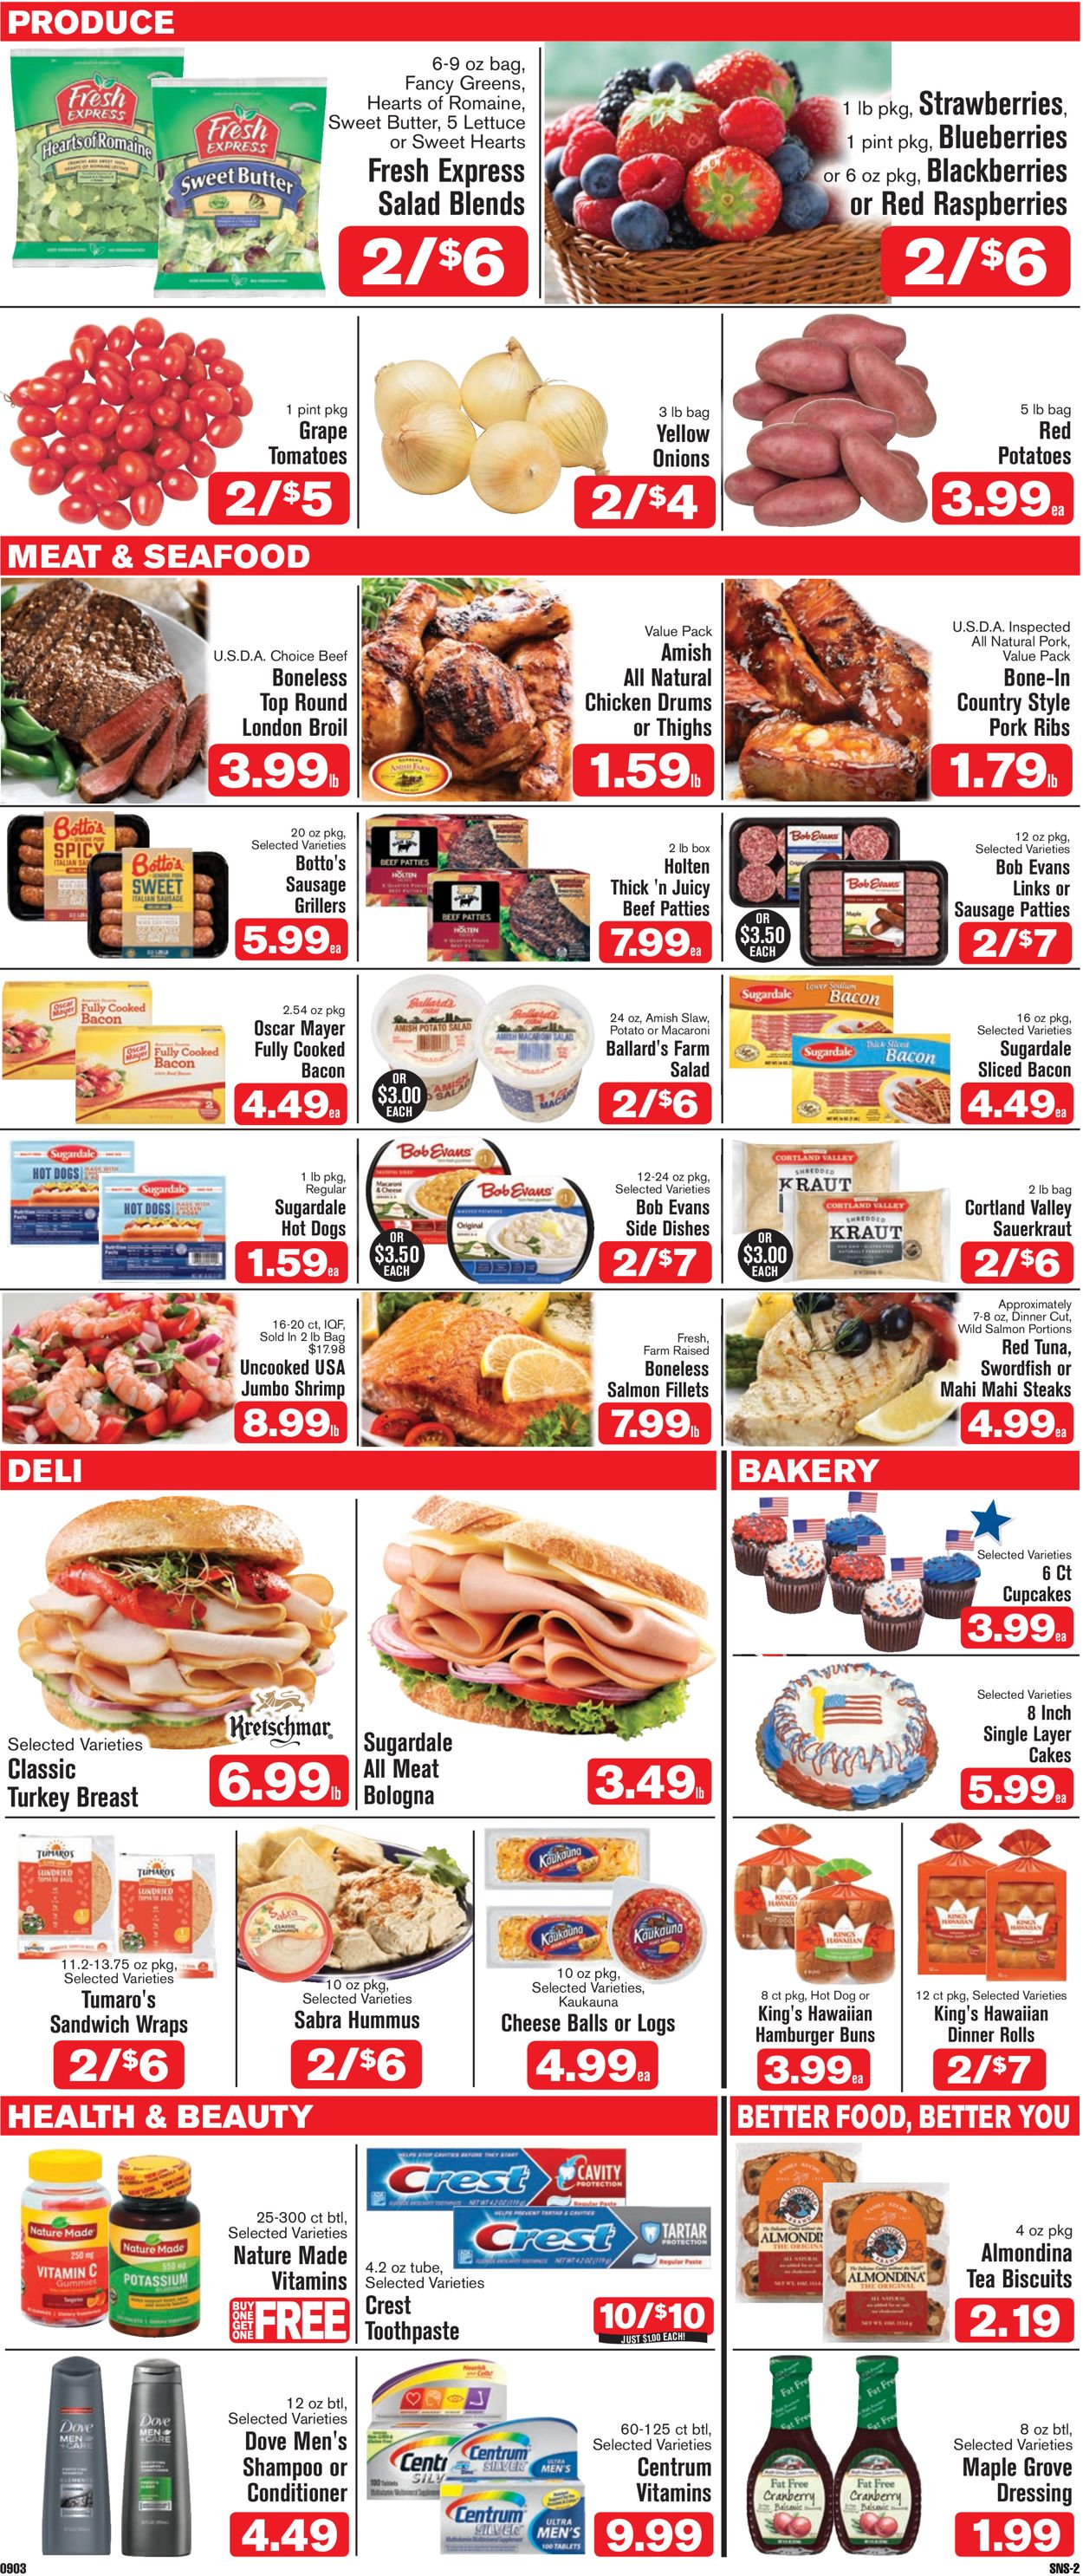 Shop ‘n Save Ad from 09/03/2020